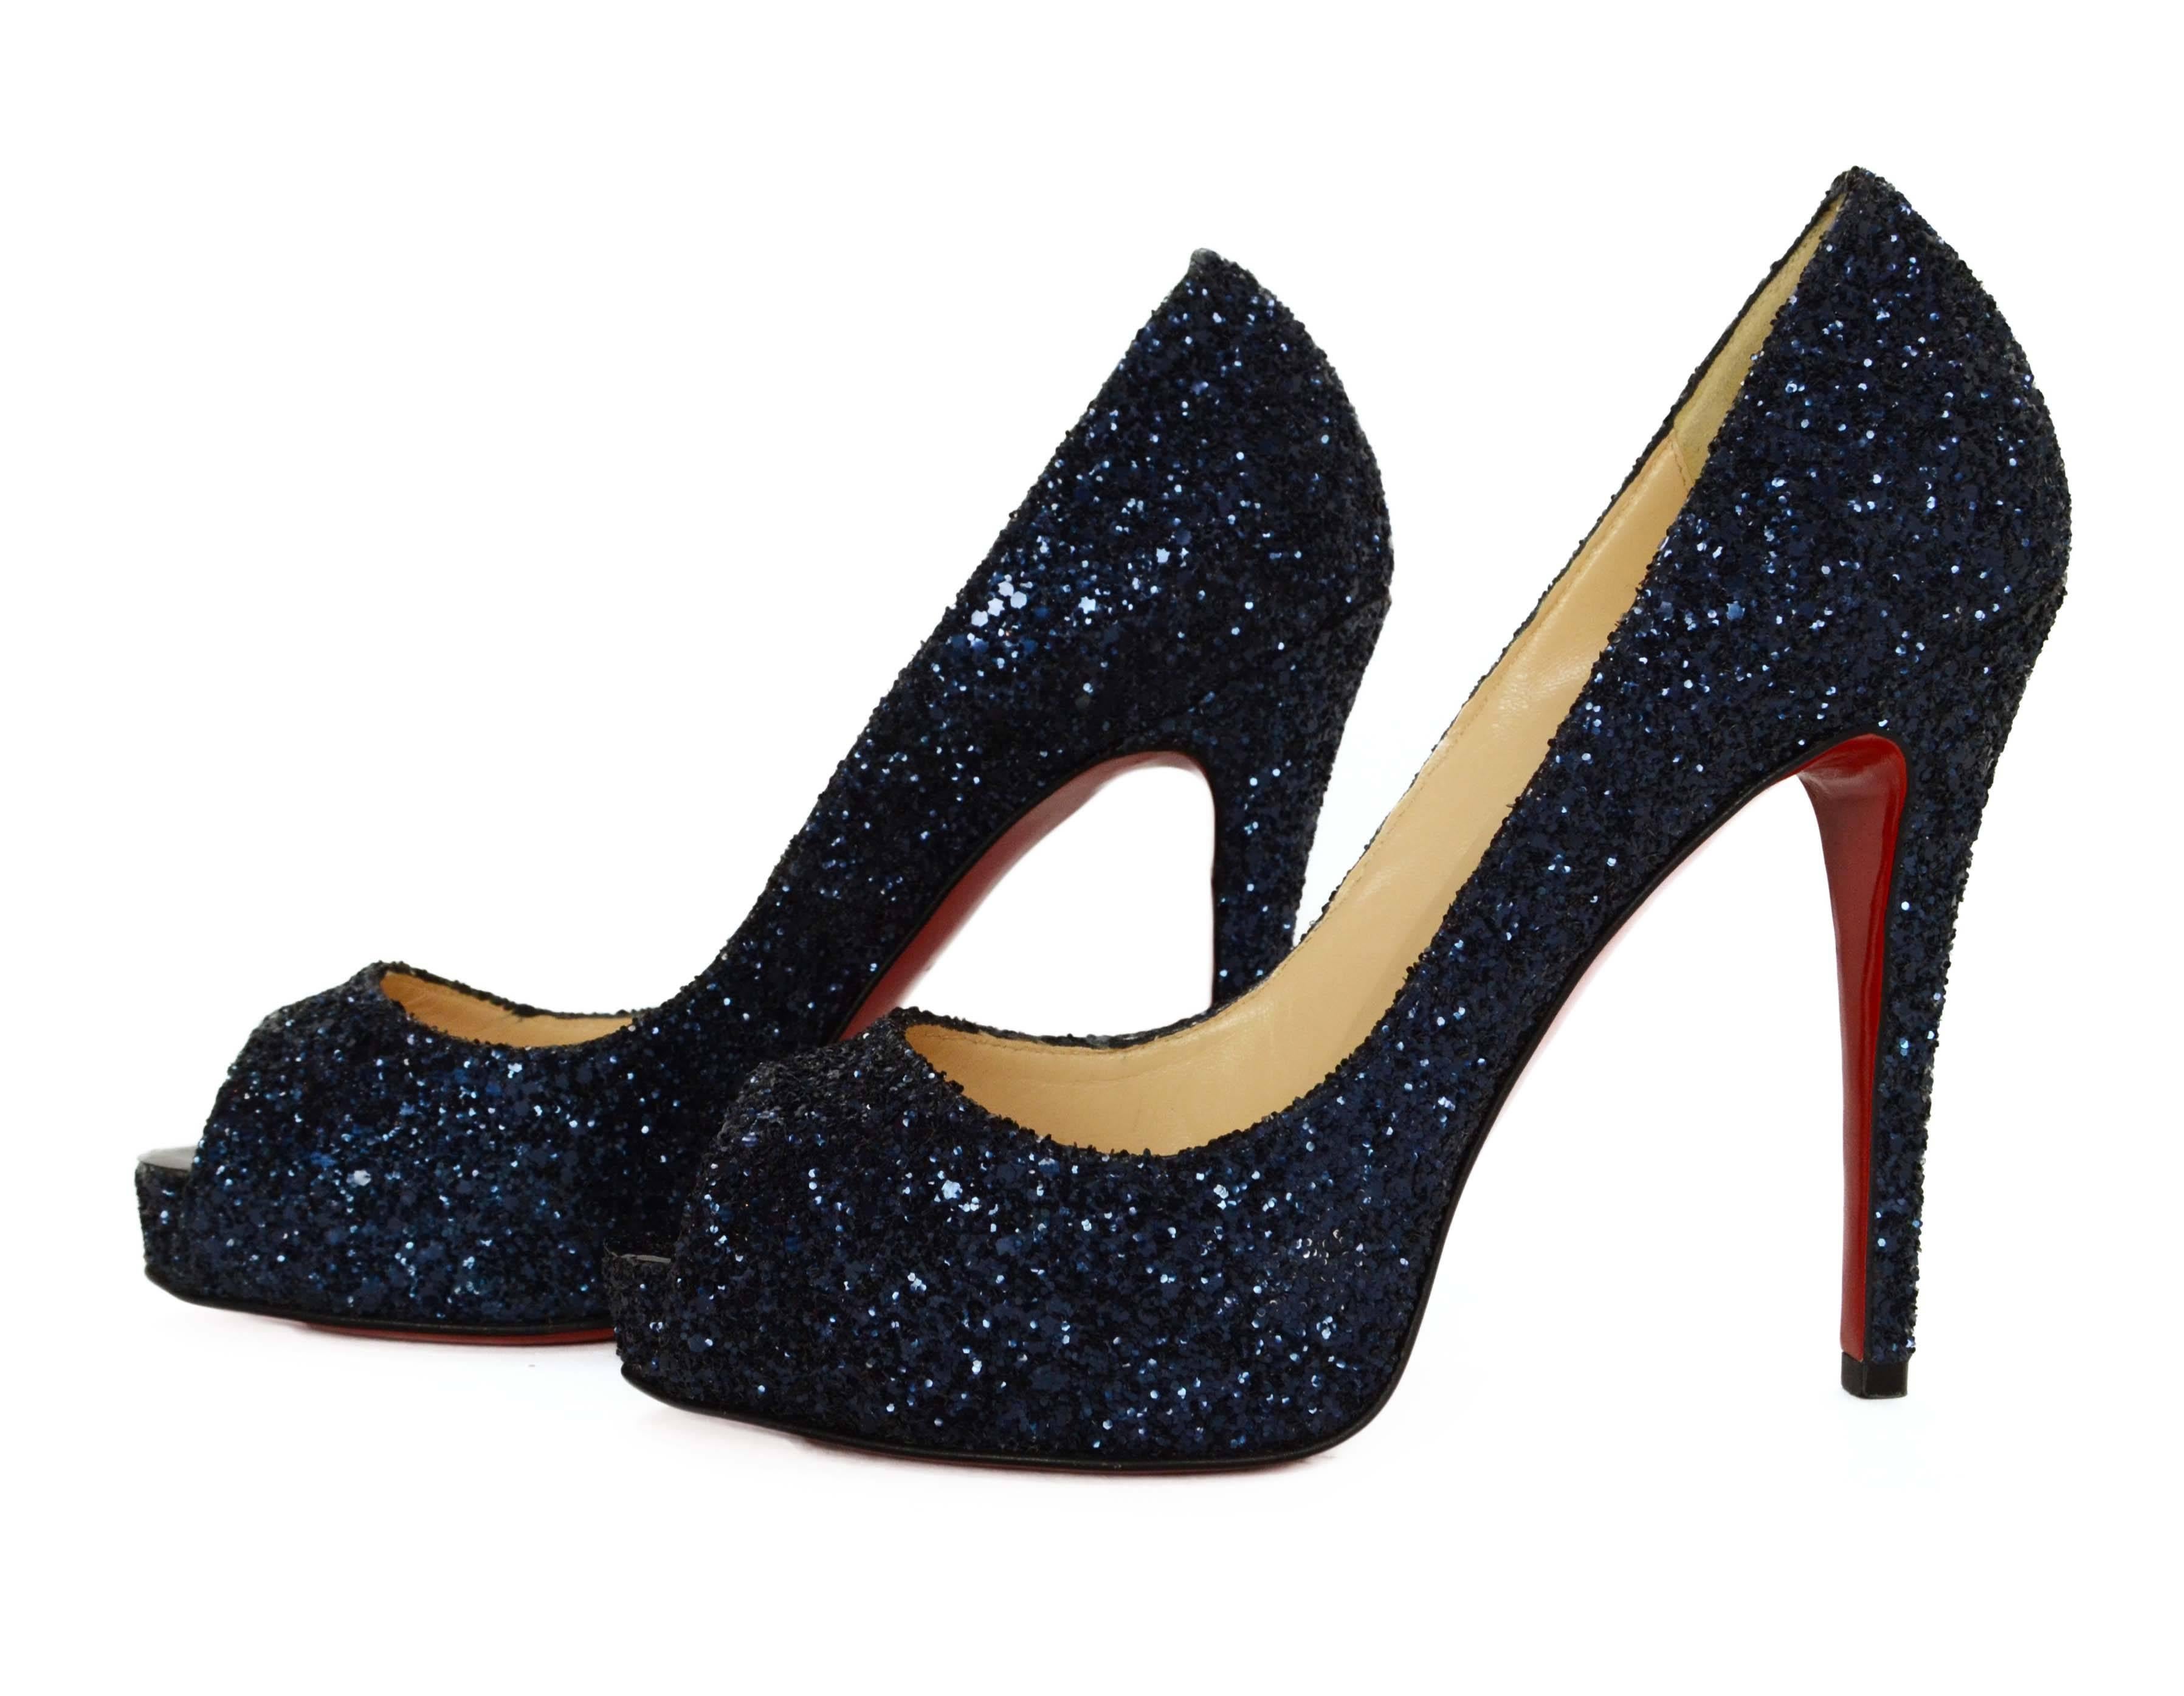 Christian Louboutin Very Prive Glitter Peep-Toe Pumps 
Features hidden platform
Made In: Italy
Color: Navy
Materials: Glitter and leather
Closure/Opening: Slide on
Sole Stamp: Christian Louboutin Made in Italy 37
Overall Condition: Excellent-